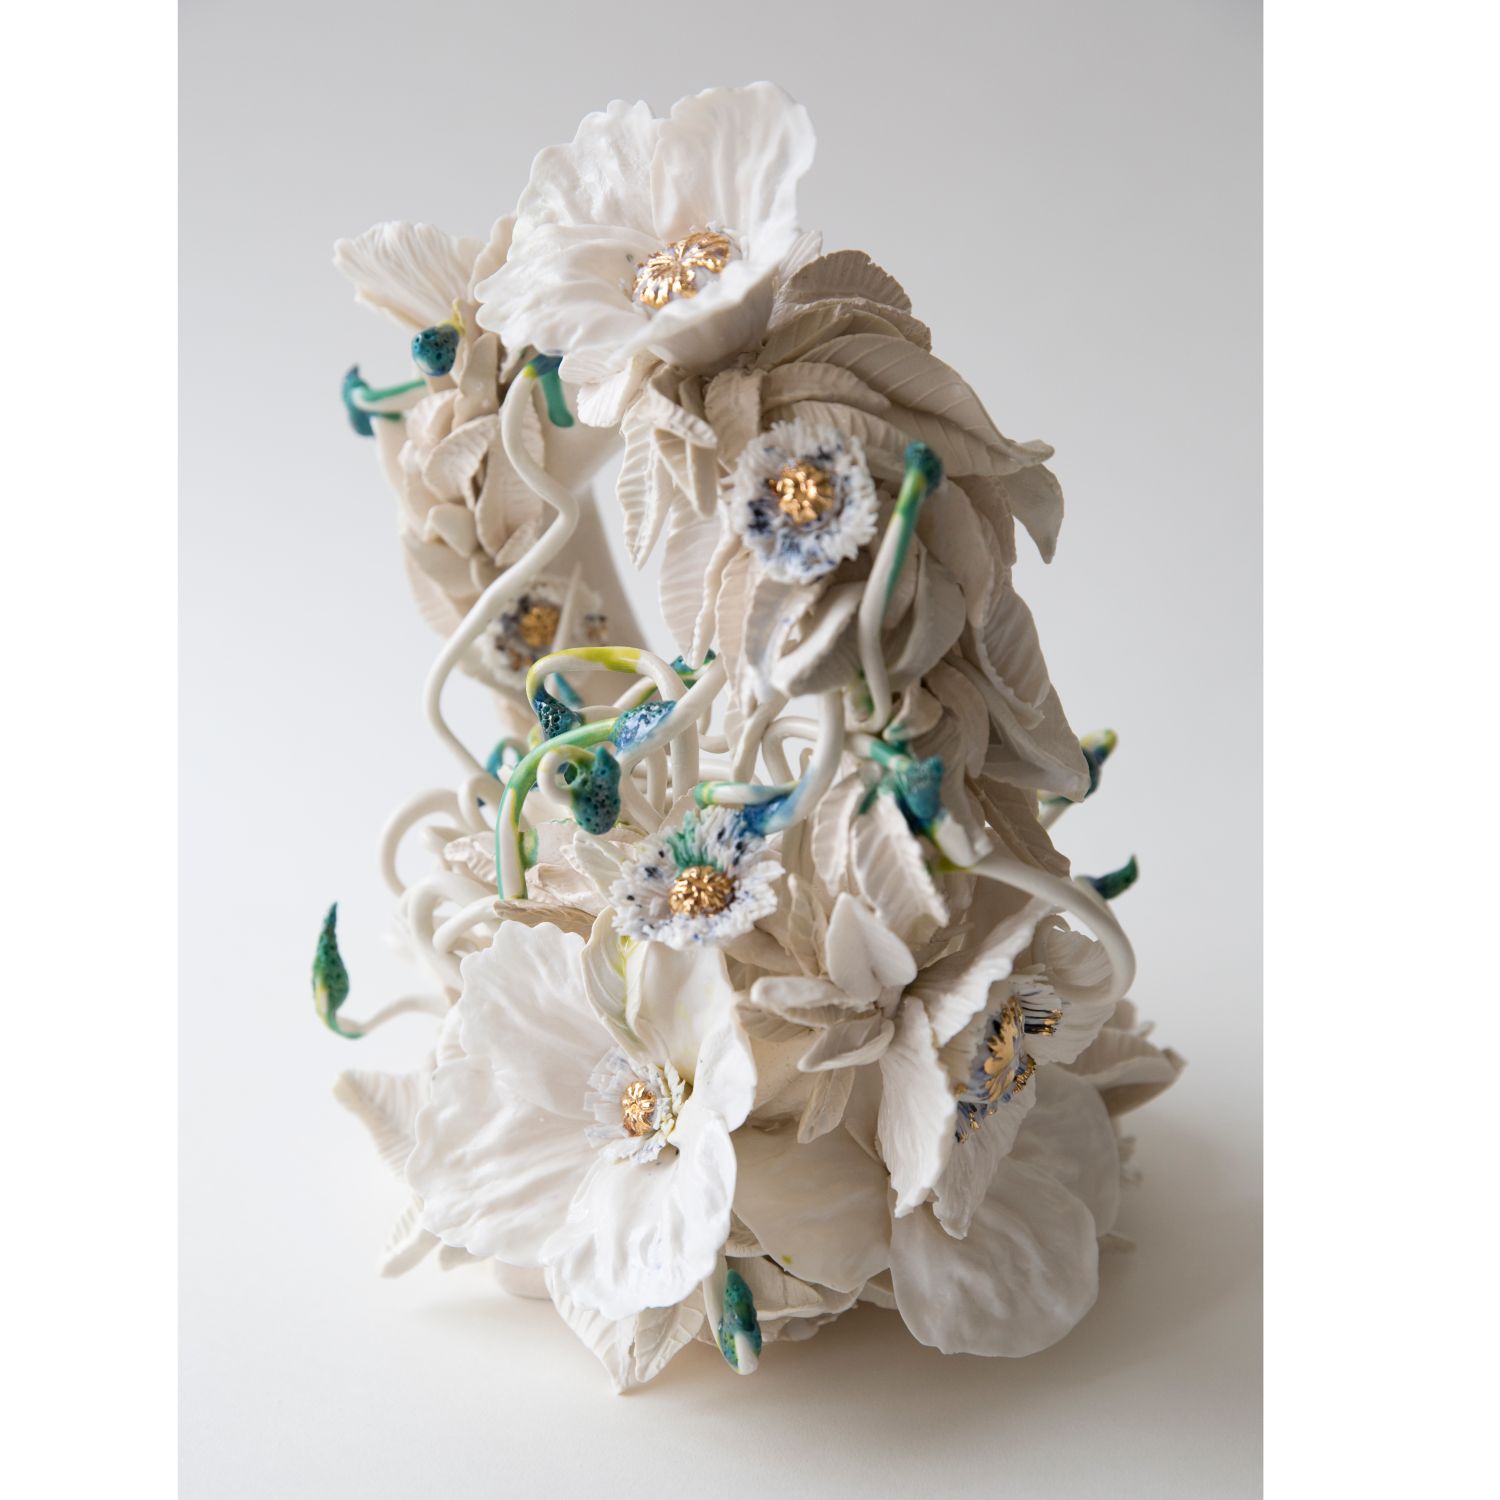 Jess Riva Cooper: Fruiting Bodies and Peonies – Sculpture Product Image 3 of 3